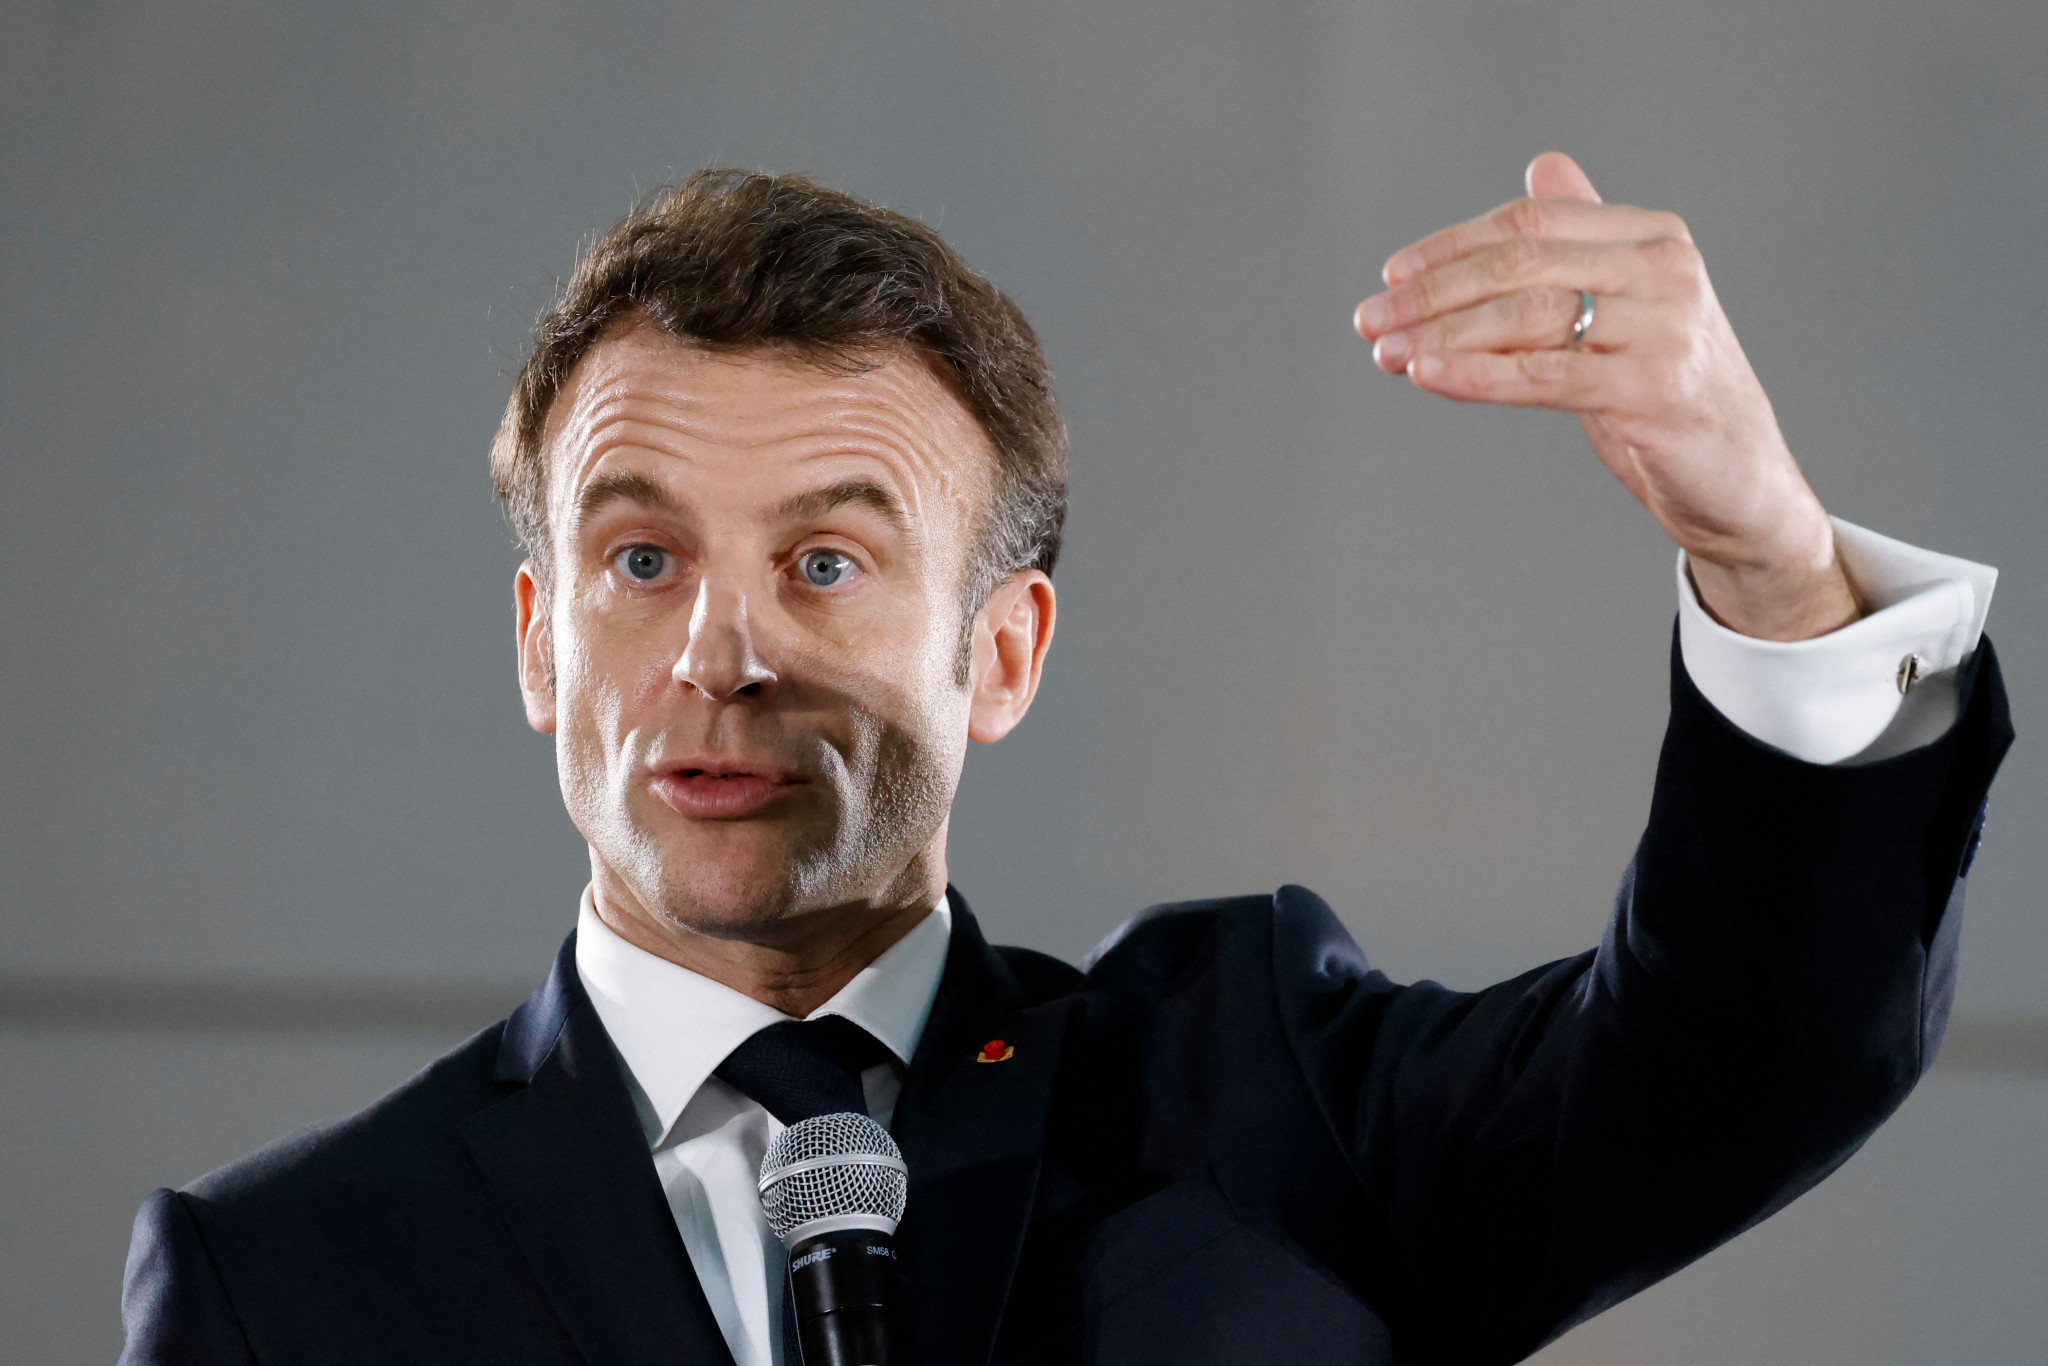 Macron promises no Russian flag at Paris 2024 but "complete confidence" in Bach on athletes decision